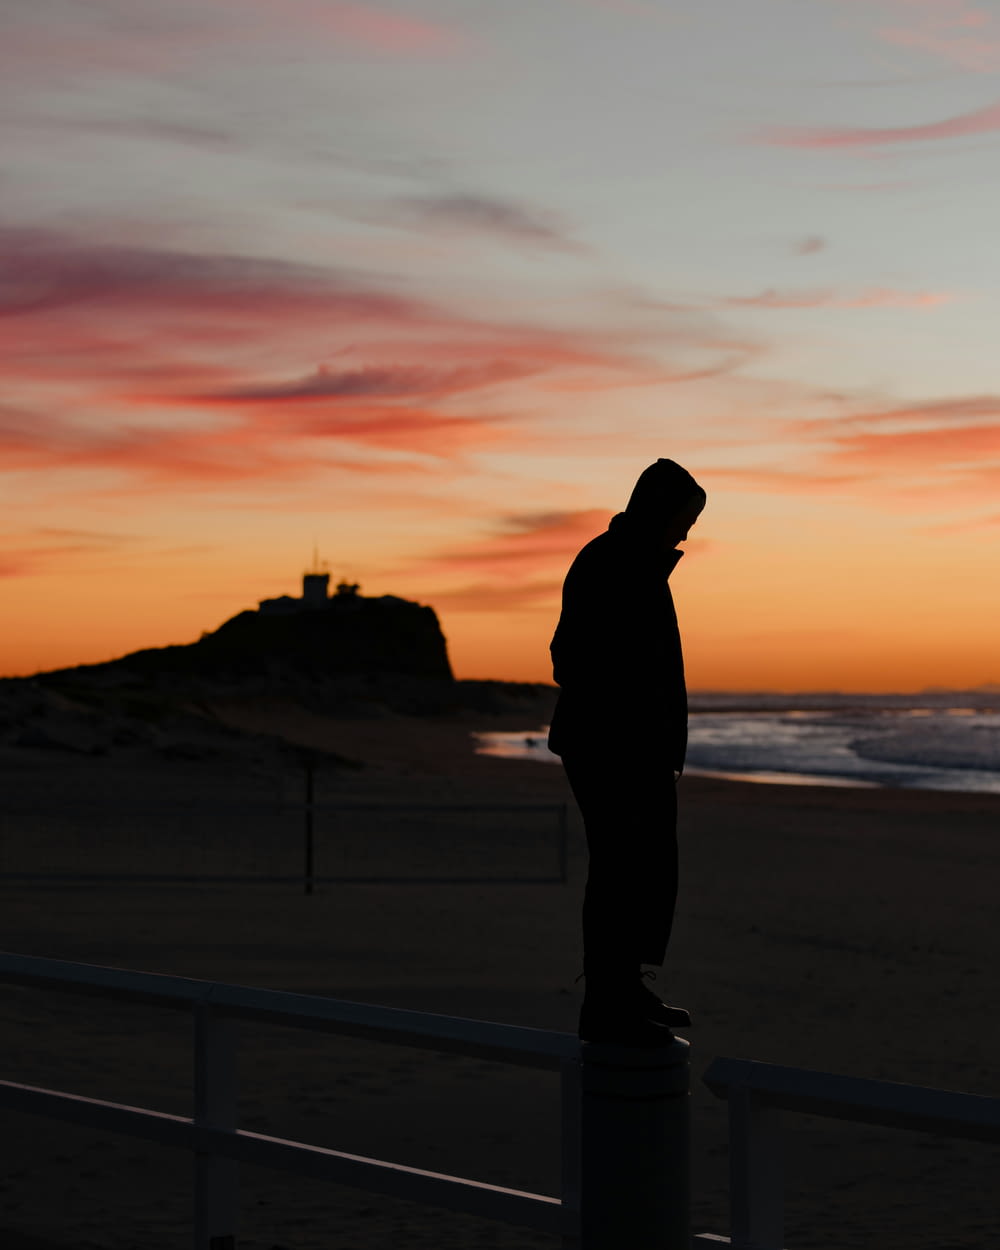 a person standing on a beach at sunset